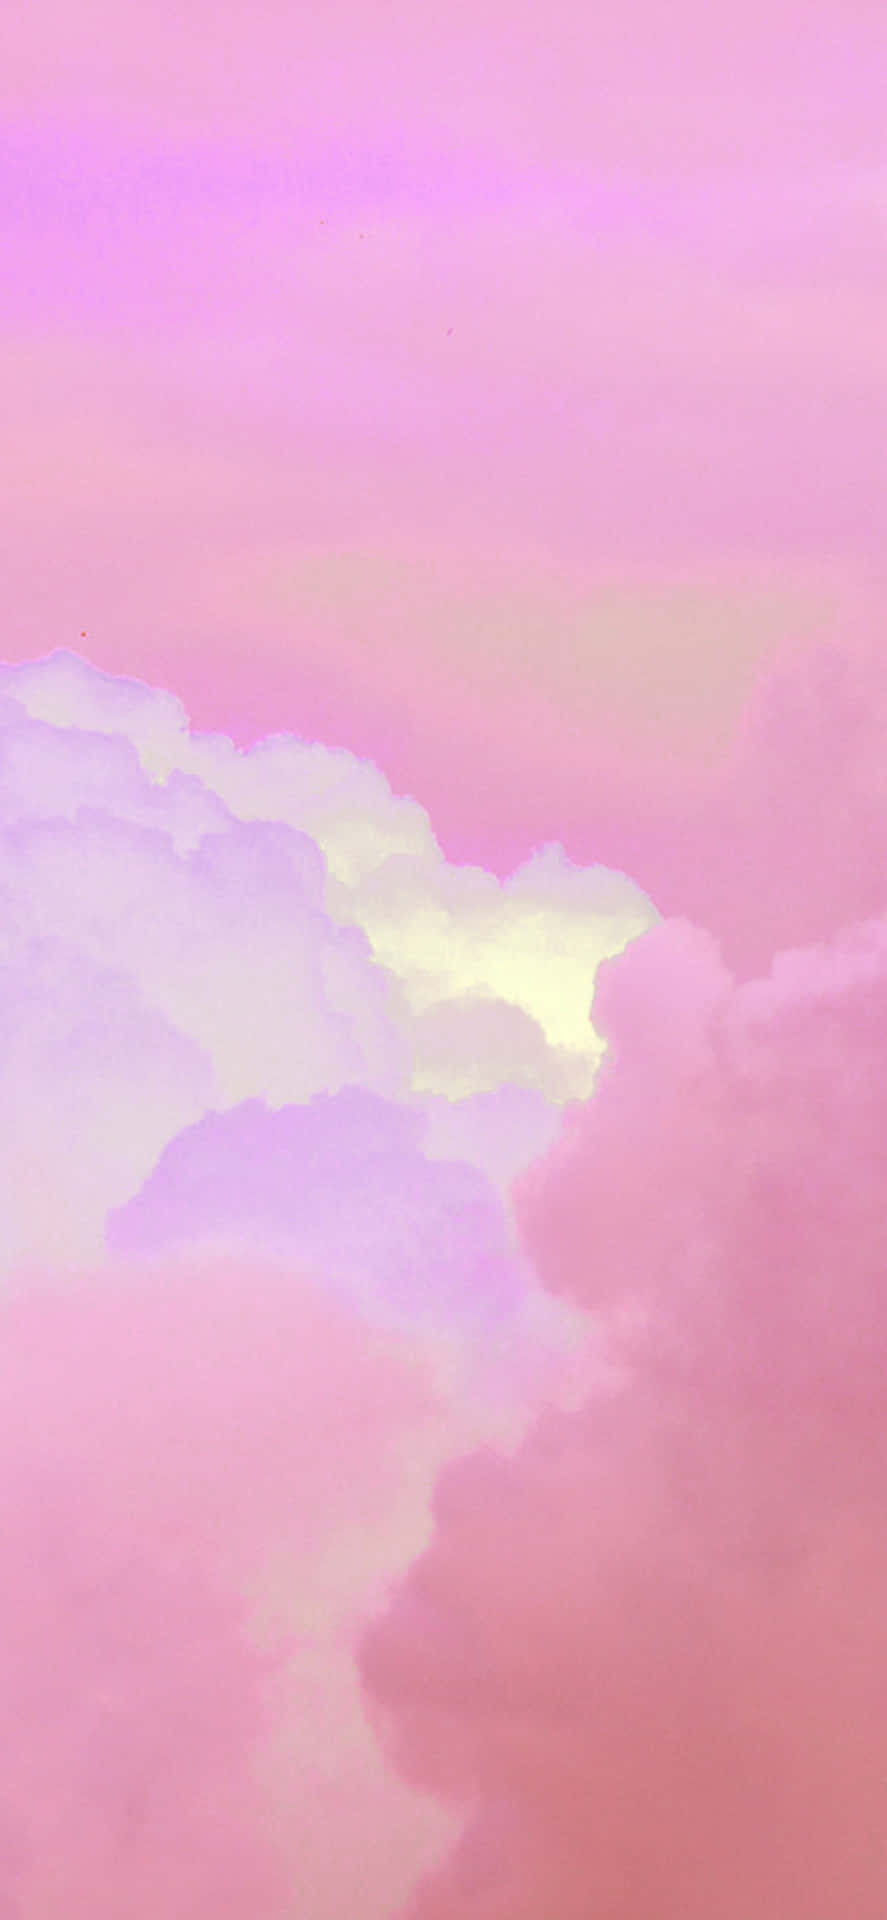 Bright and Colorful Pastel Pink and Purple Gradient Background Wallpaper